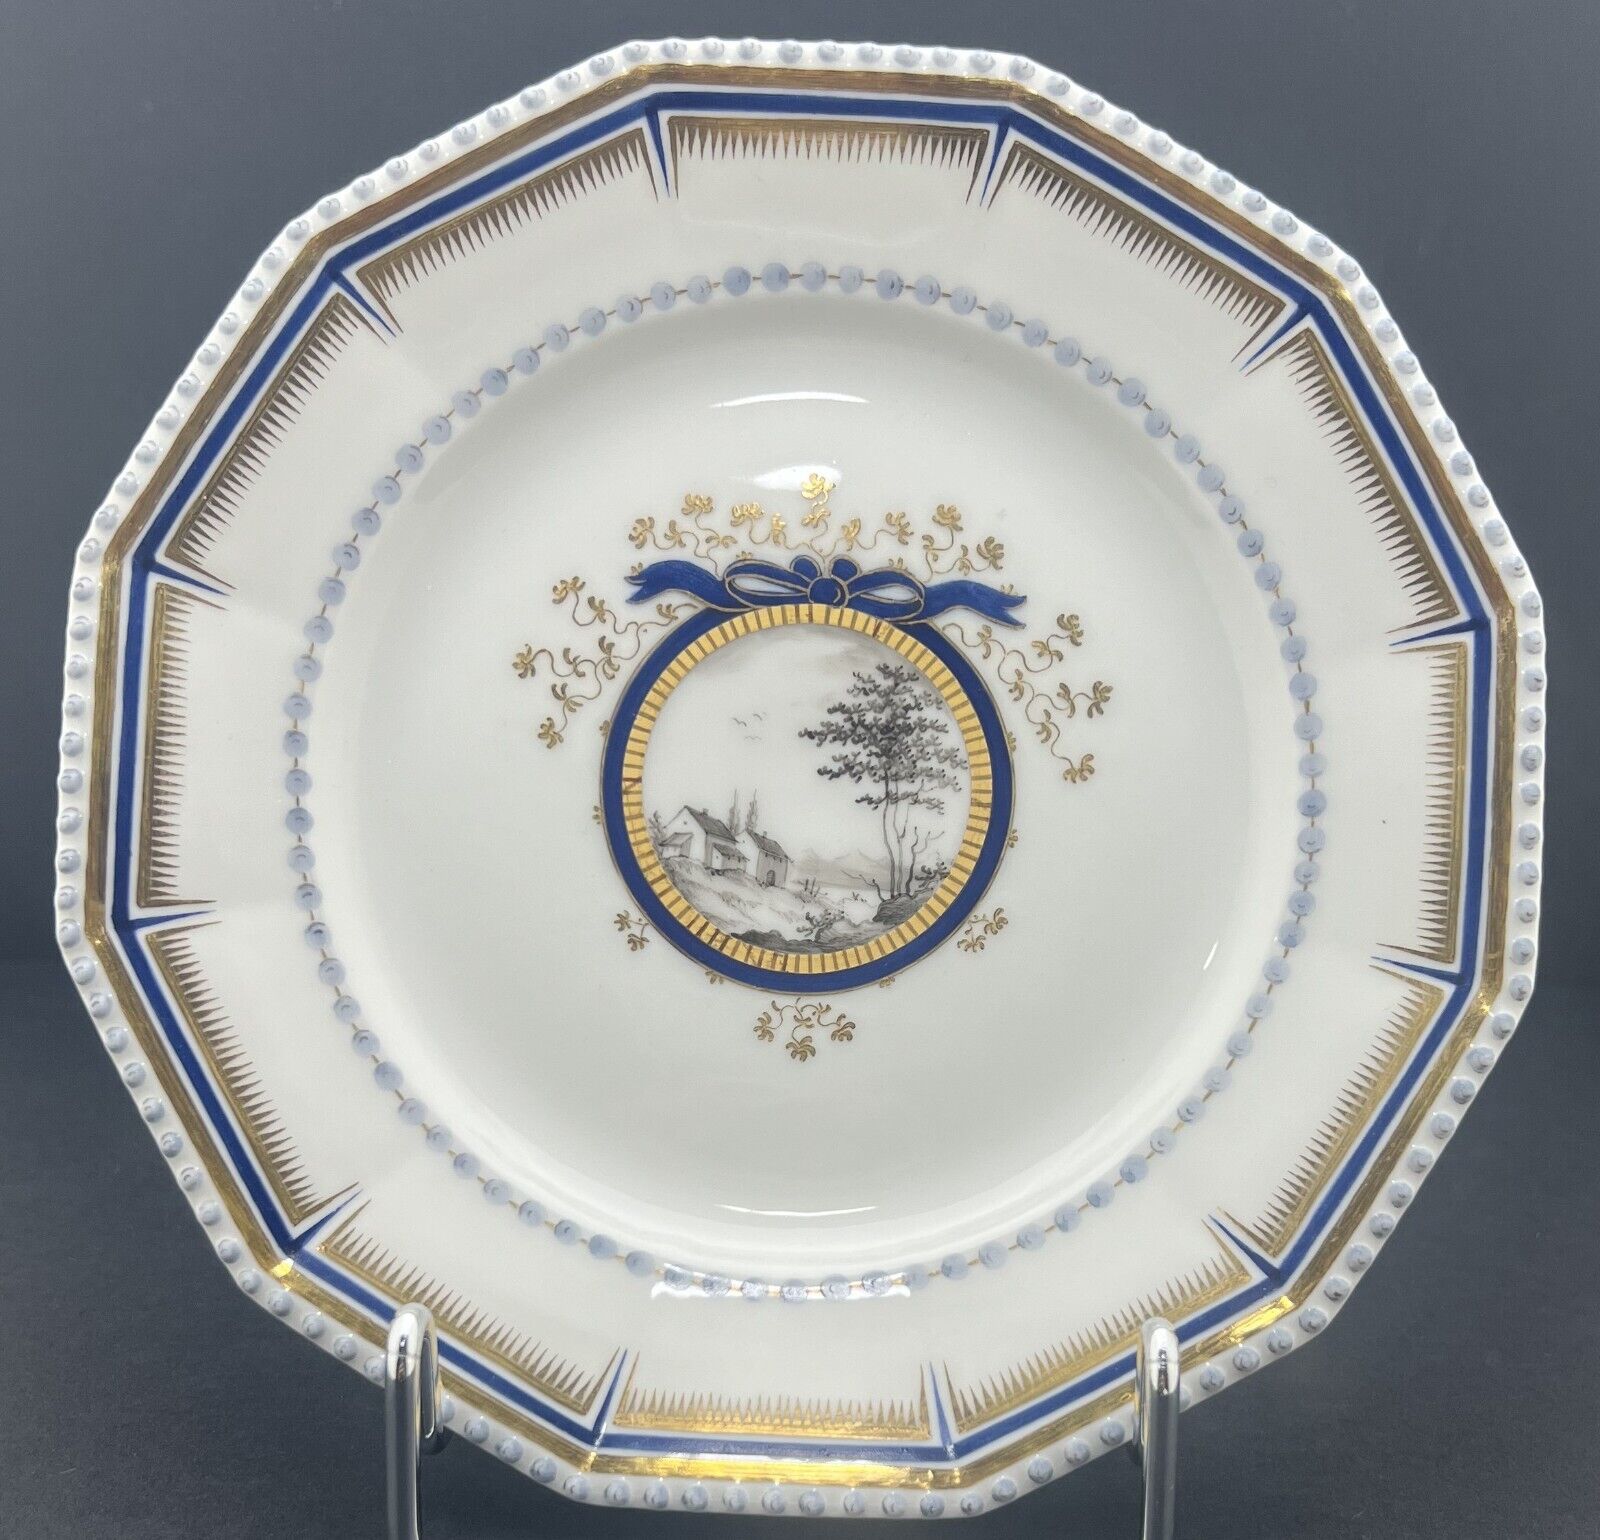 Nymphenburg Porcelain, King’s / Pearl Service, Plate, 19 cm / 7.48 Inch